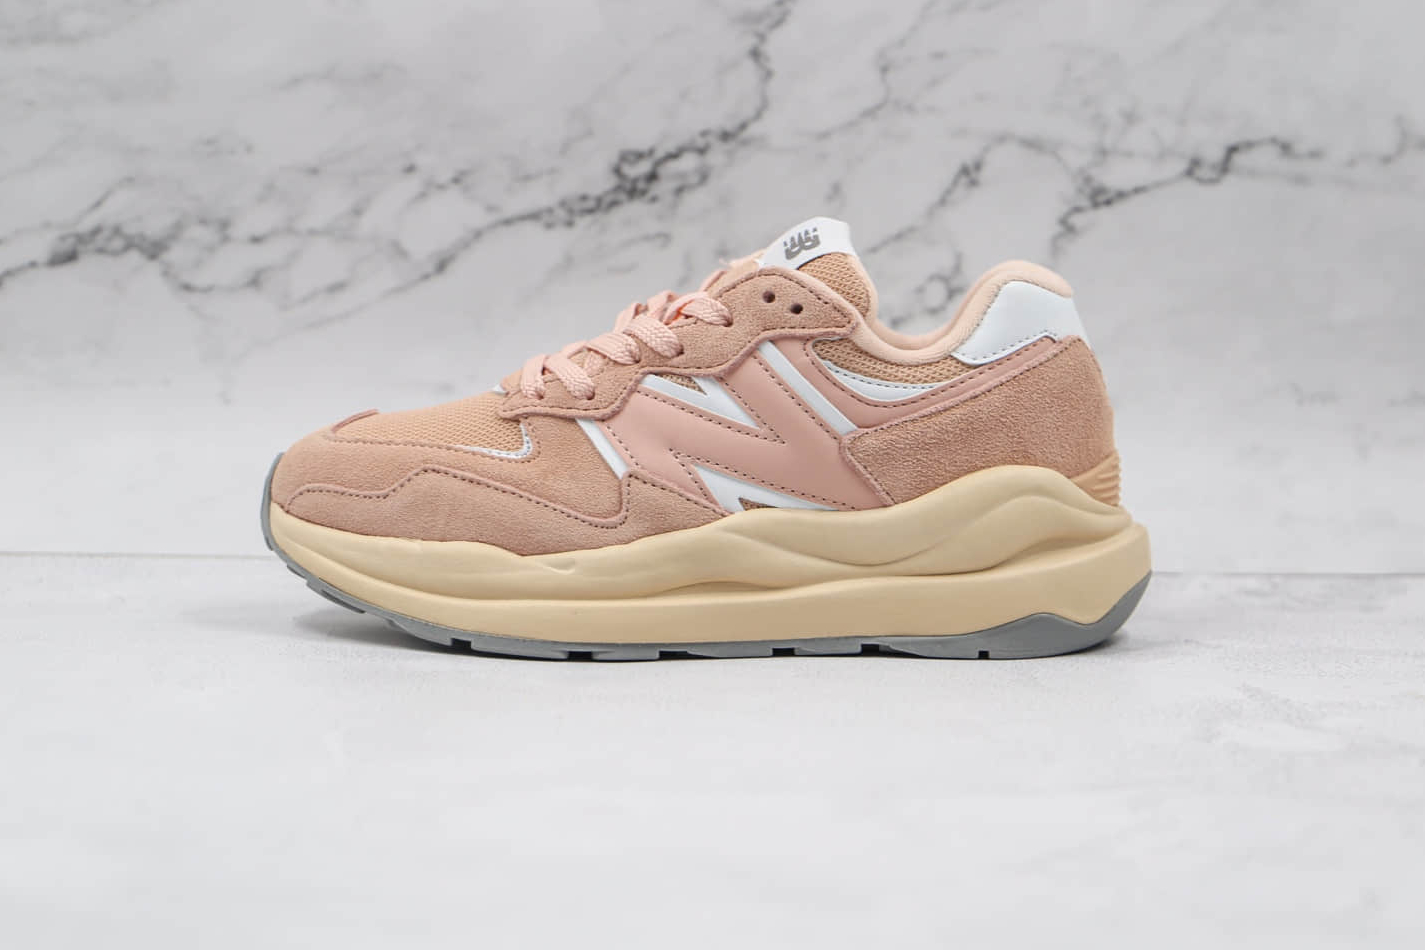 New Balance 57 40 'Rose Water' W5740CC - Stylish and Comfortable Women's Sneakers